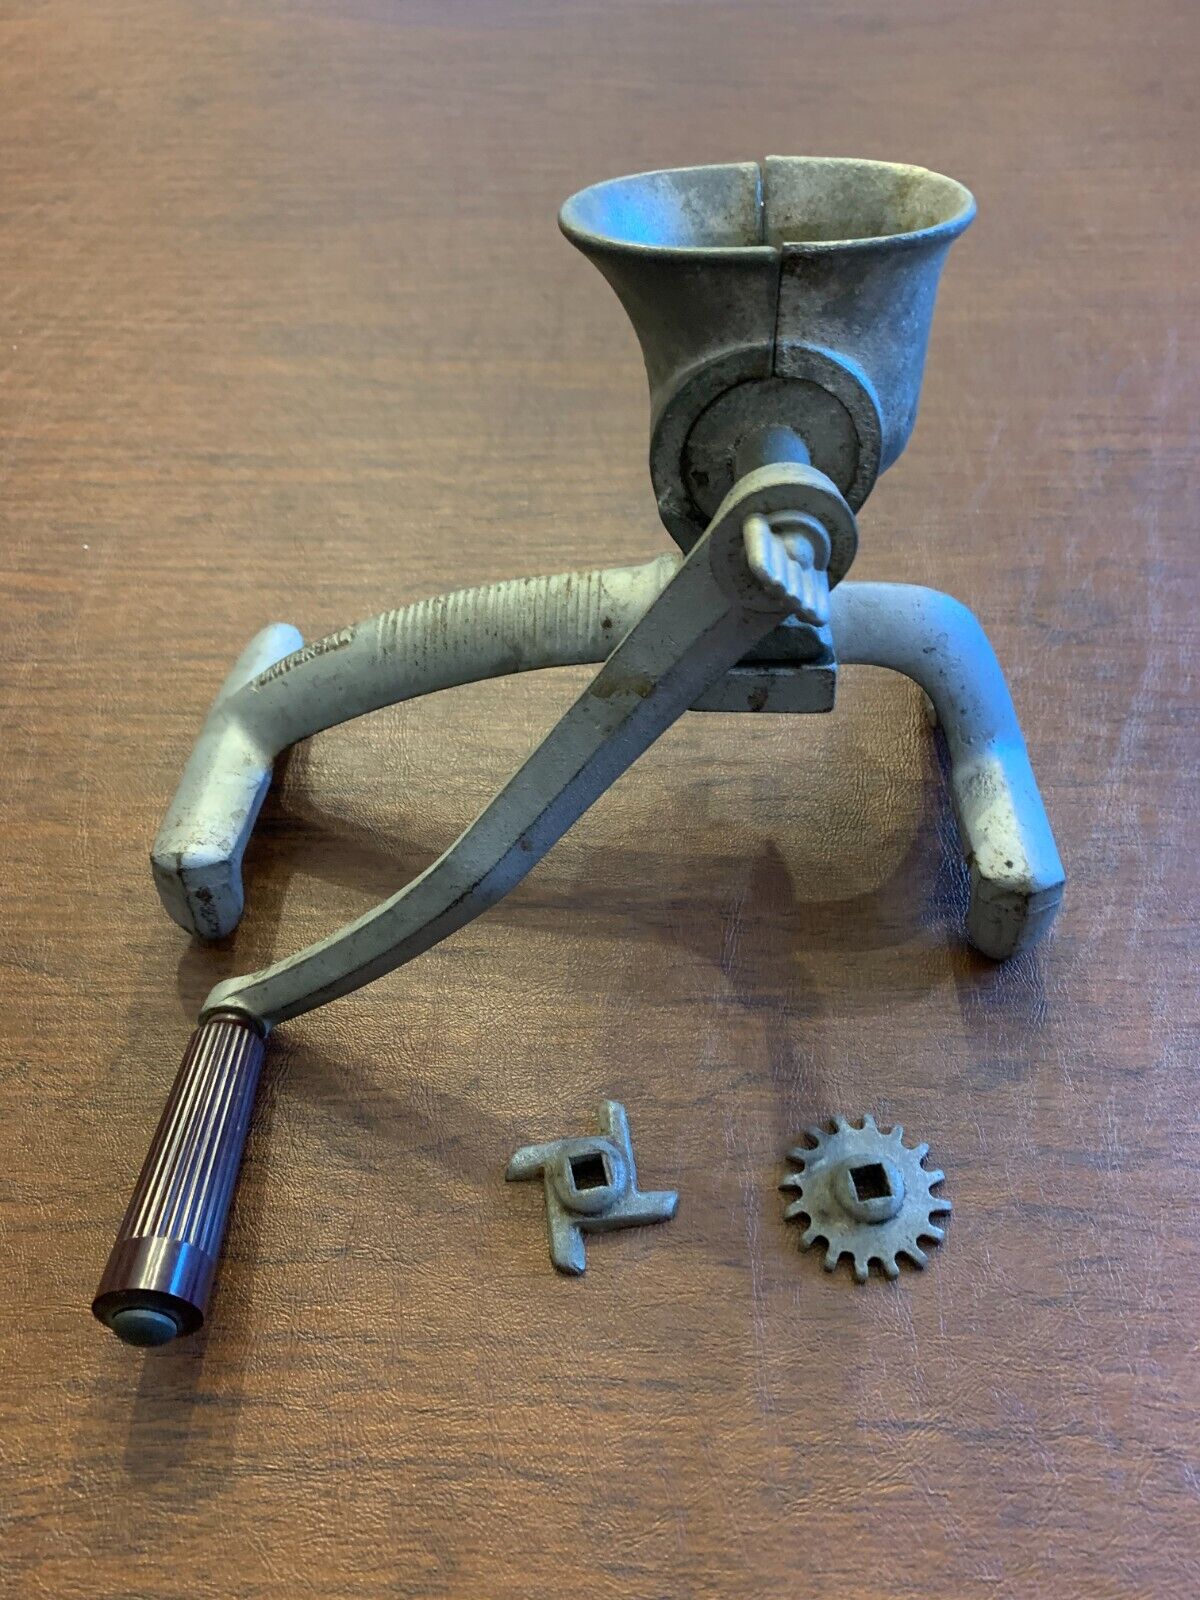 RARE HTF ANTIQUE UNIVERSAL EDGE OF COUNTER MEAT GRINDER NO CLAMP